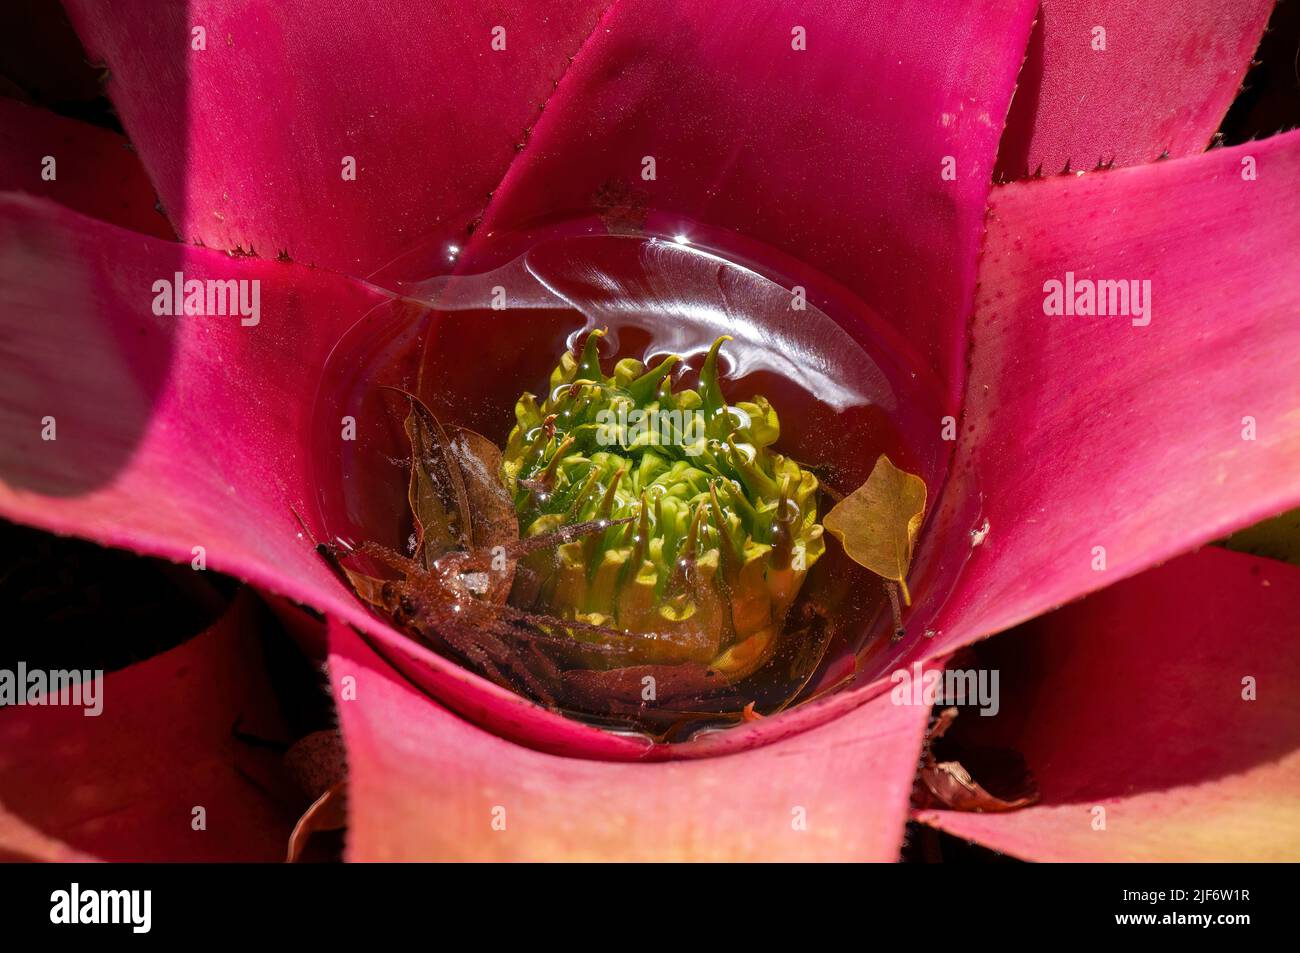 Sydney Australia, pink leaves and tank of a blushing bromeliad Stock Photo